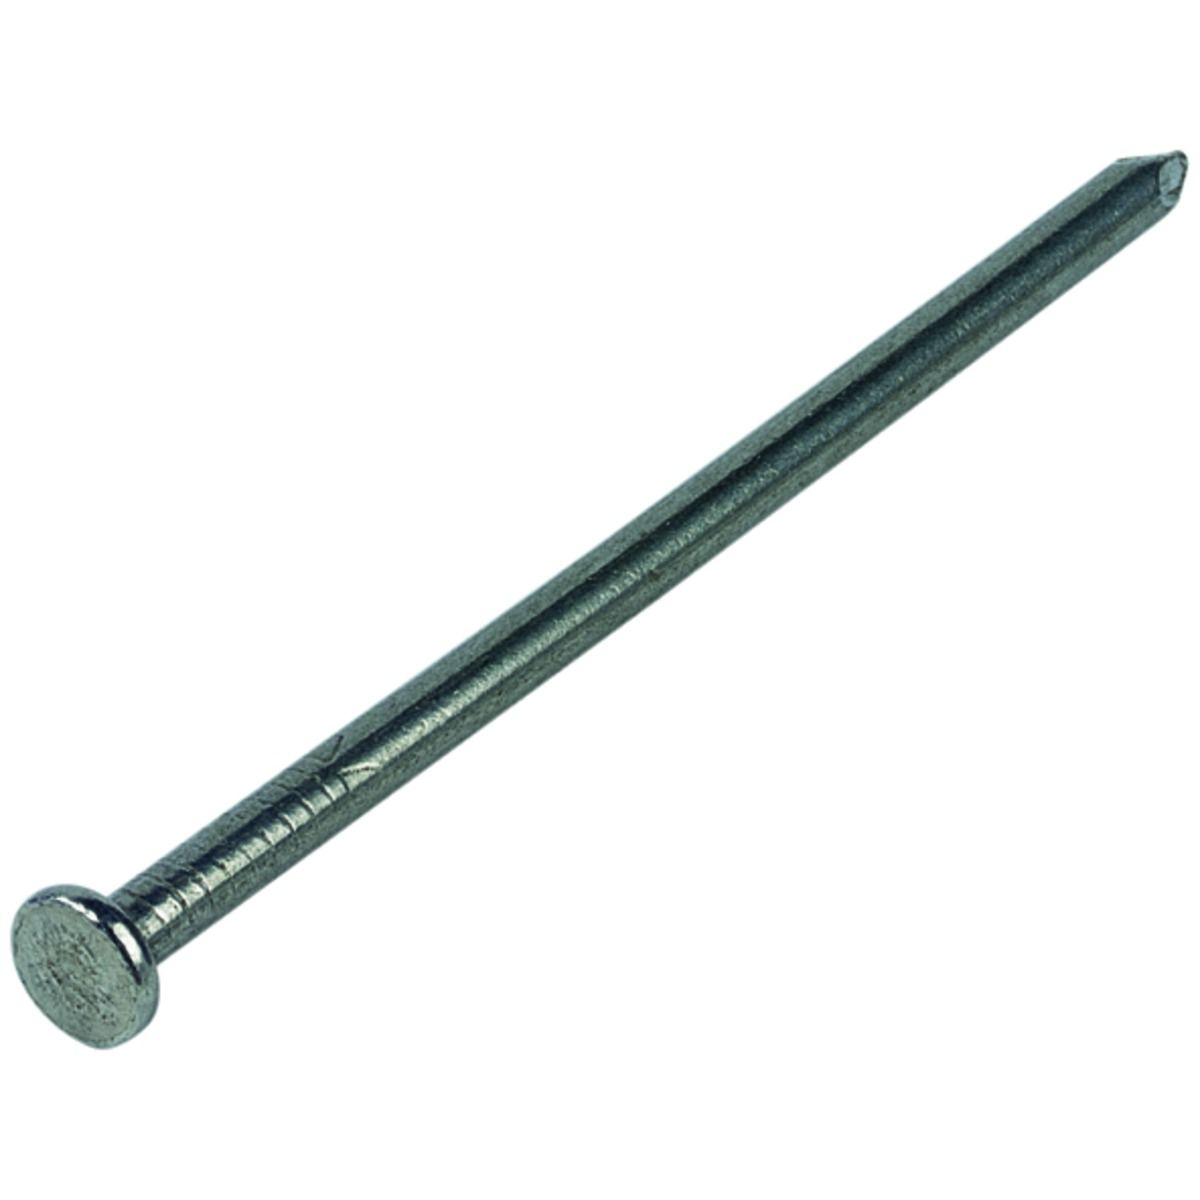 Image of Wickes 40mm Bright Round Wire Nails - 400g